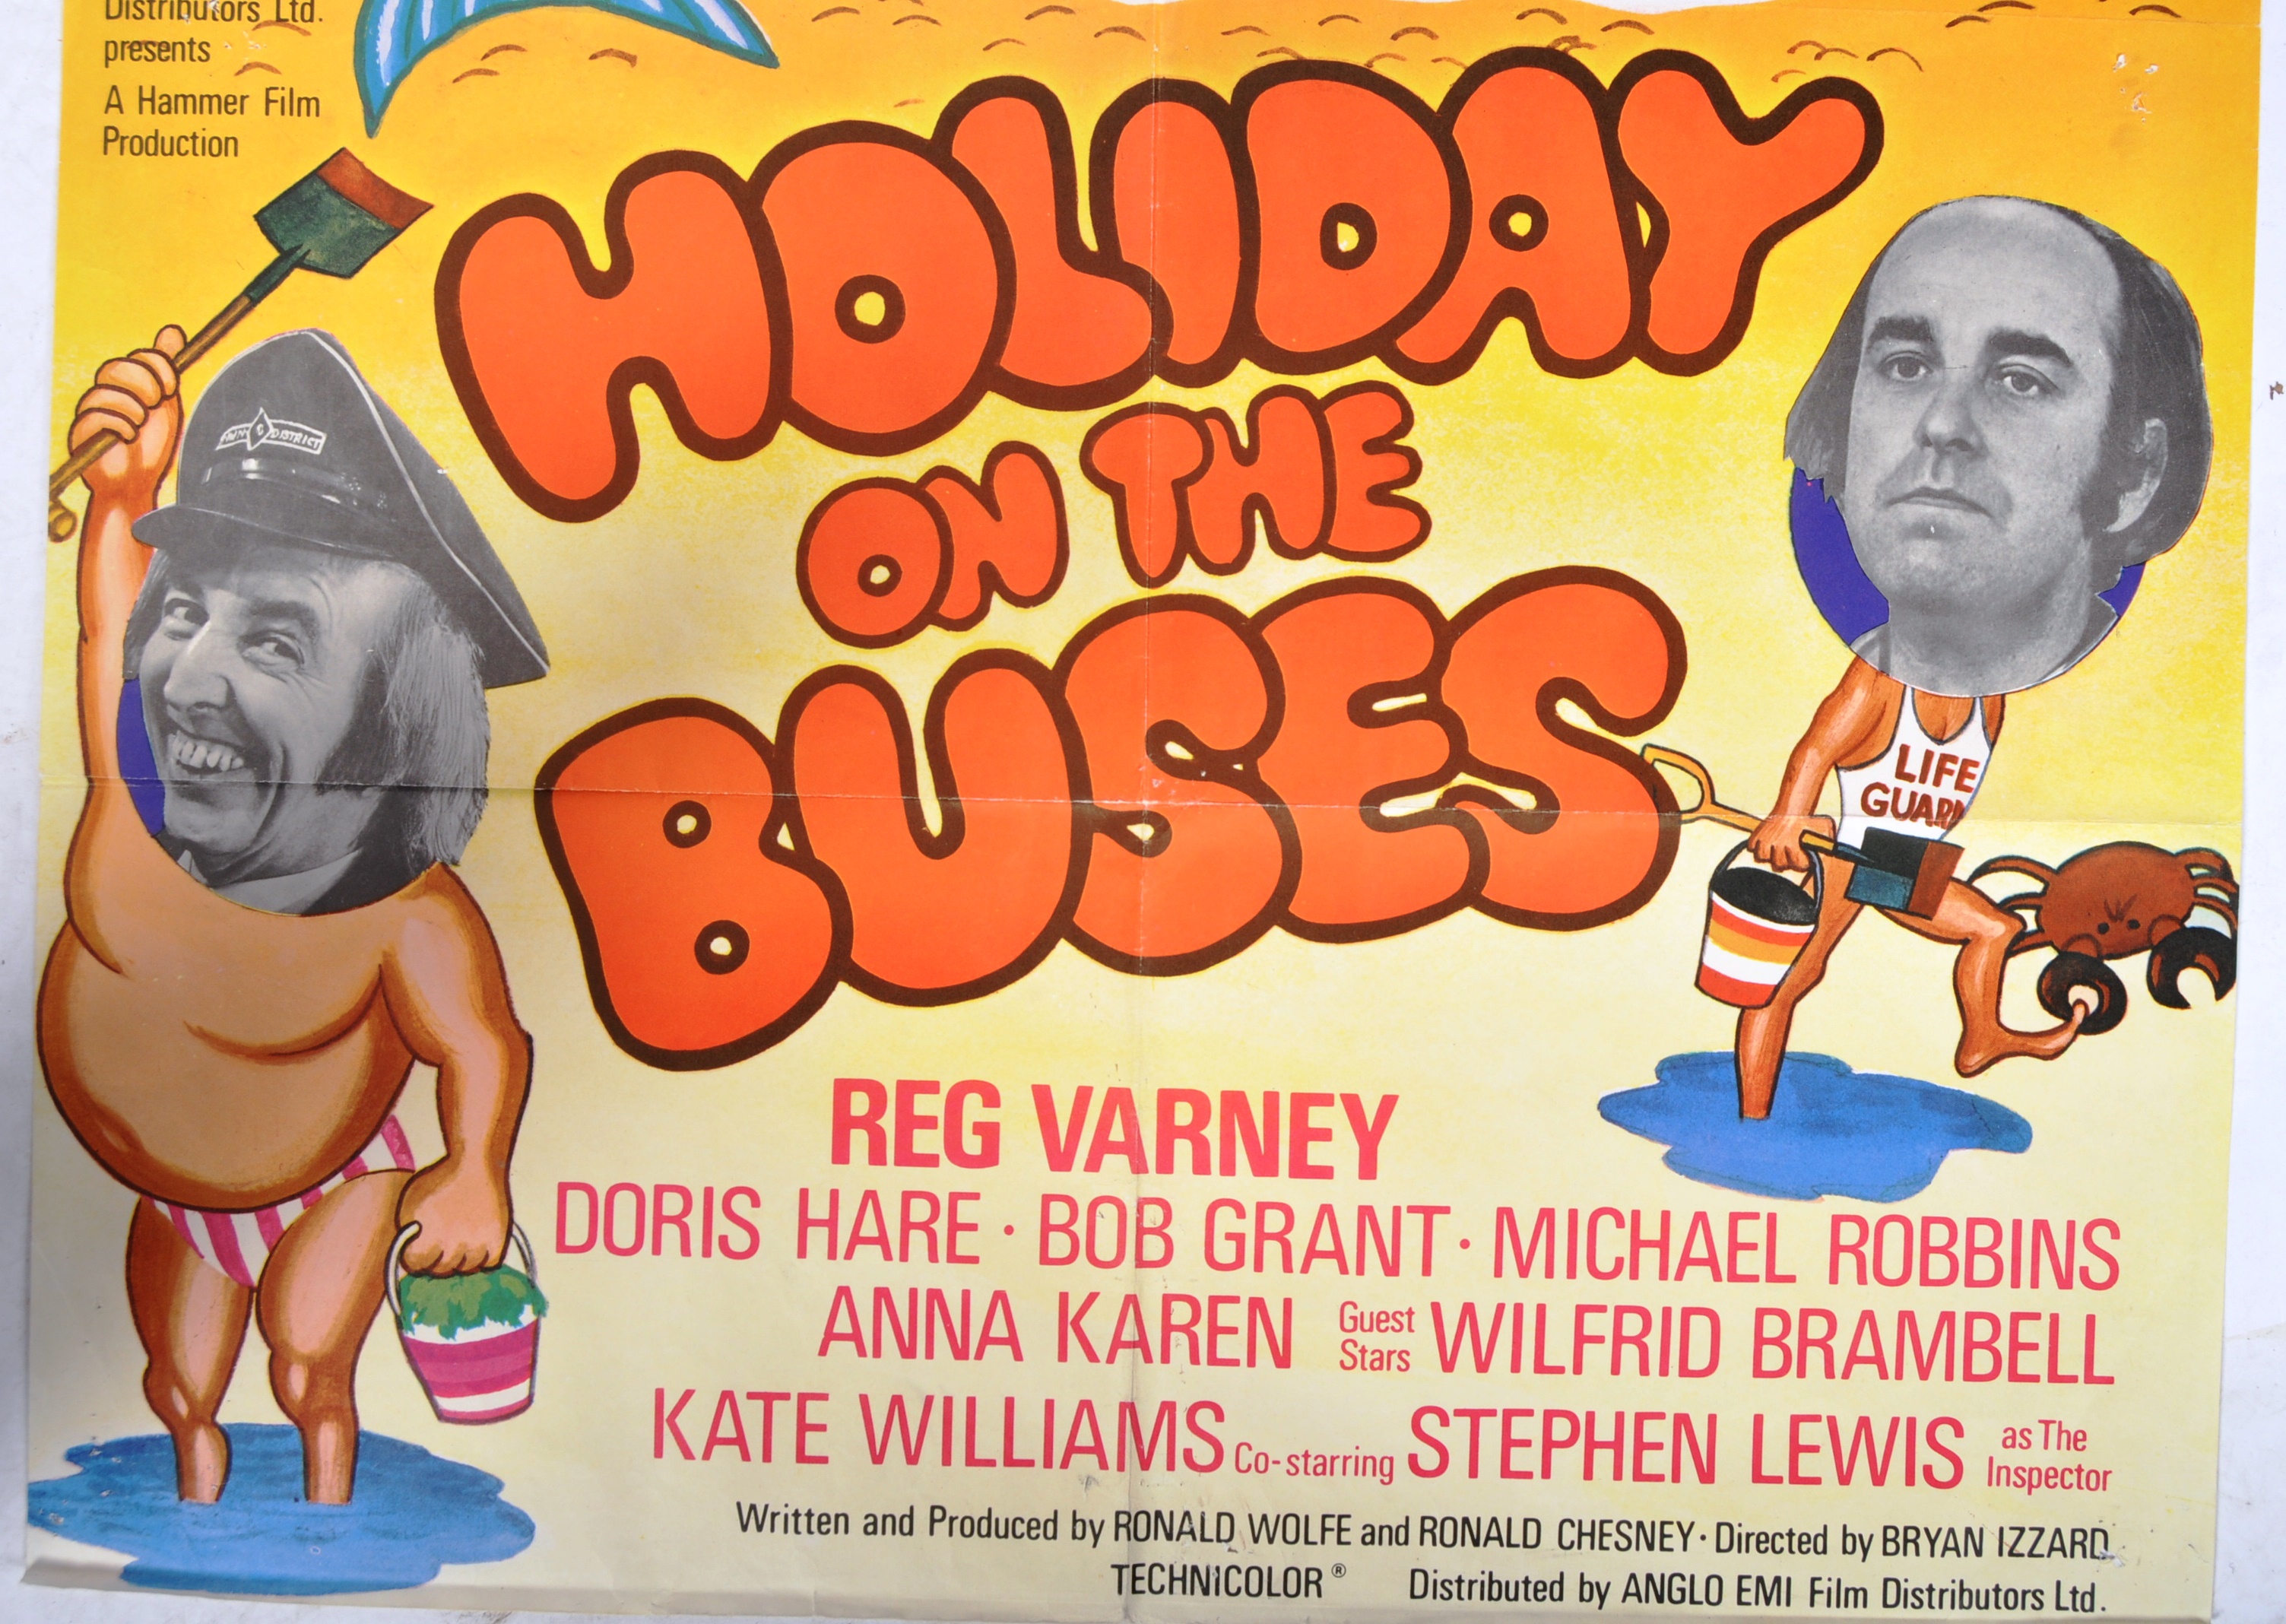 ON THE BUSES VINTAGE MOVIE CINEMA POSTER - Image 3 of 4